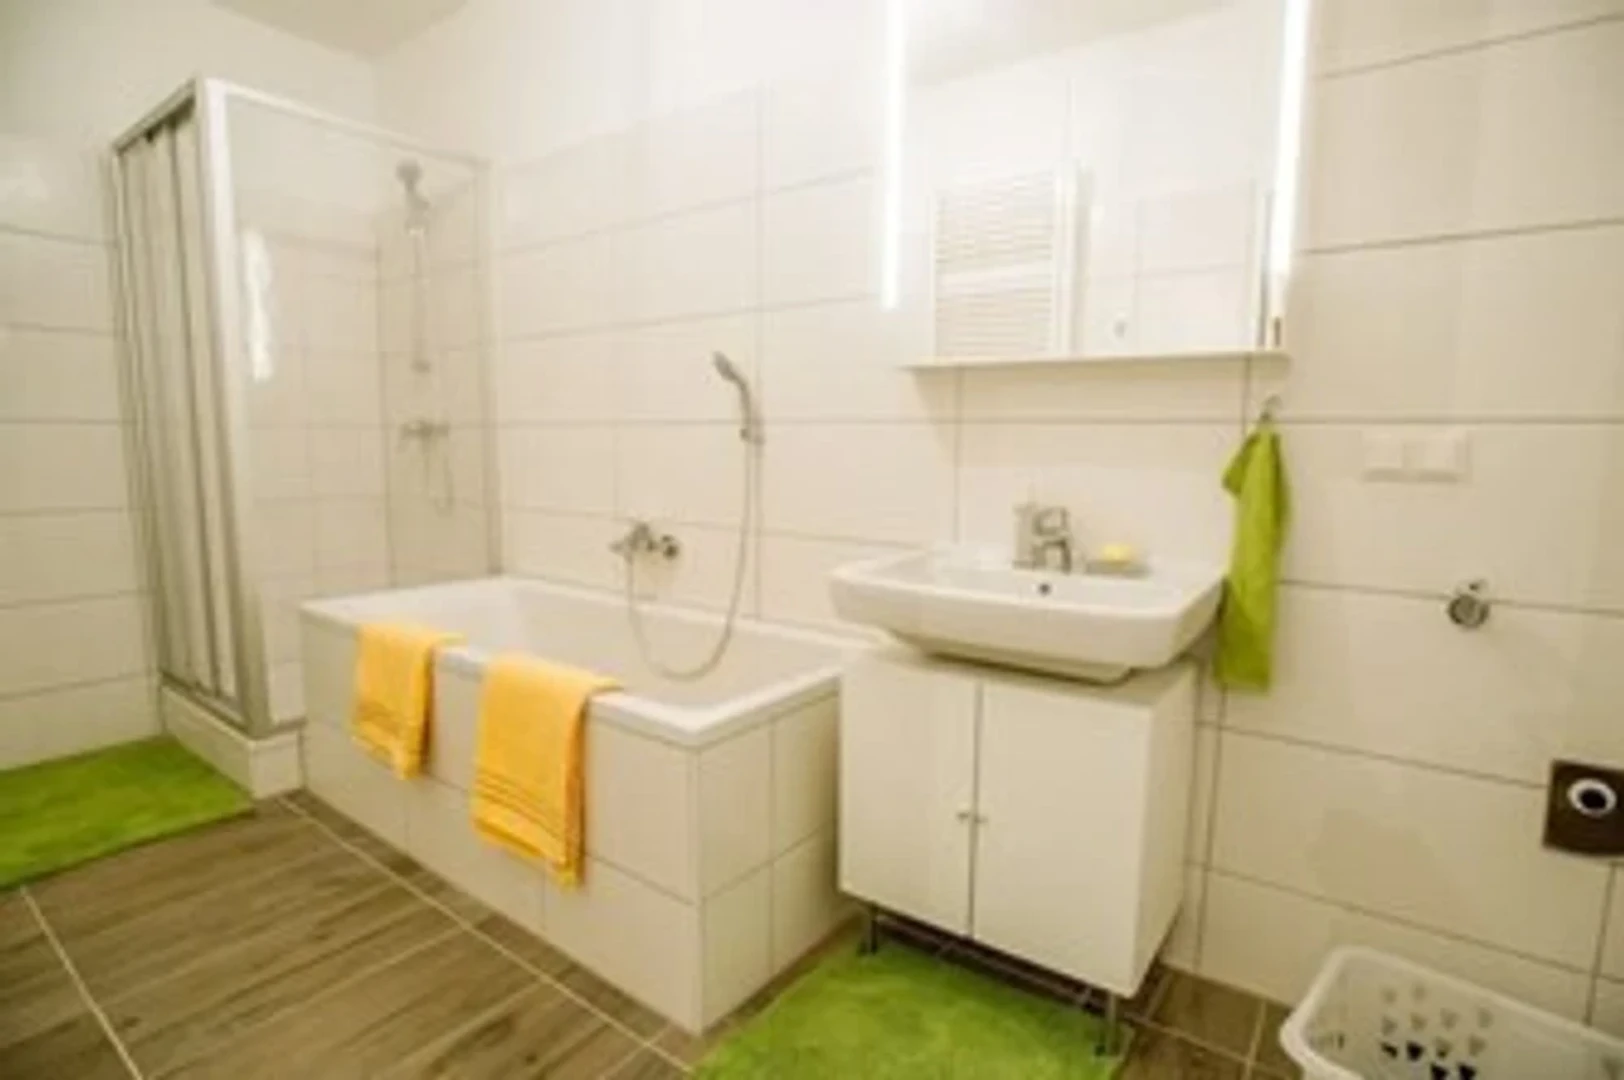 Accommodation with 3 bedrooms in Graz